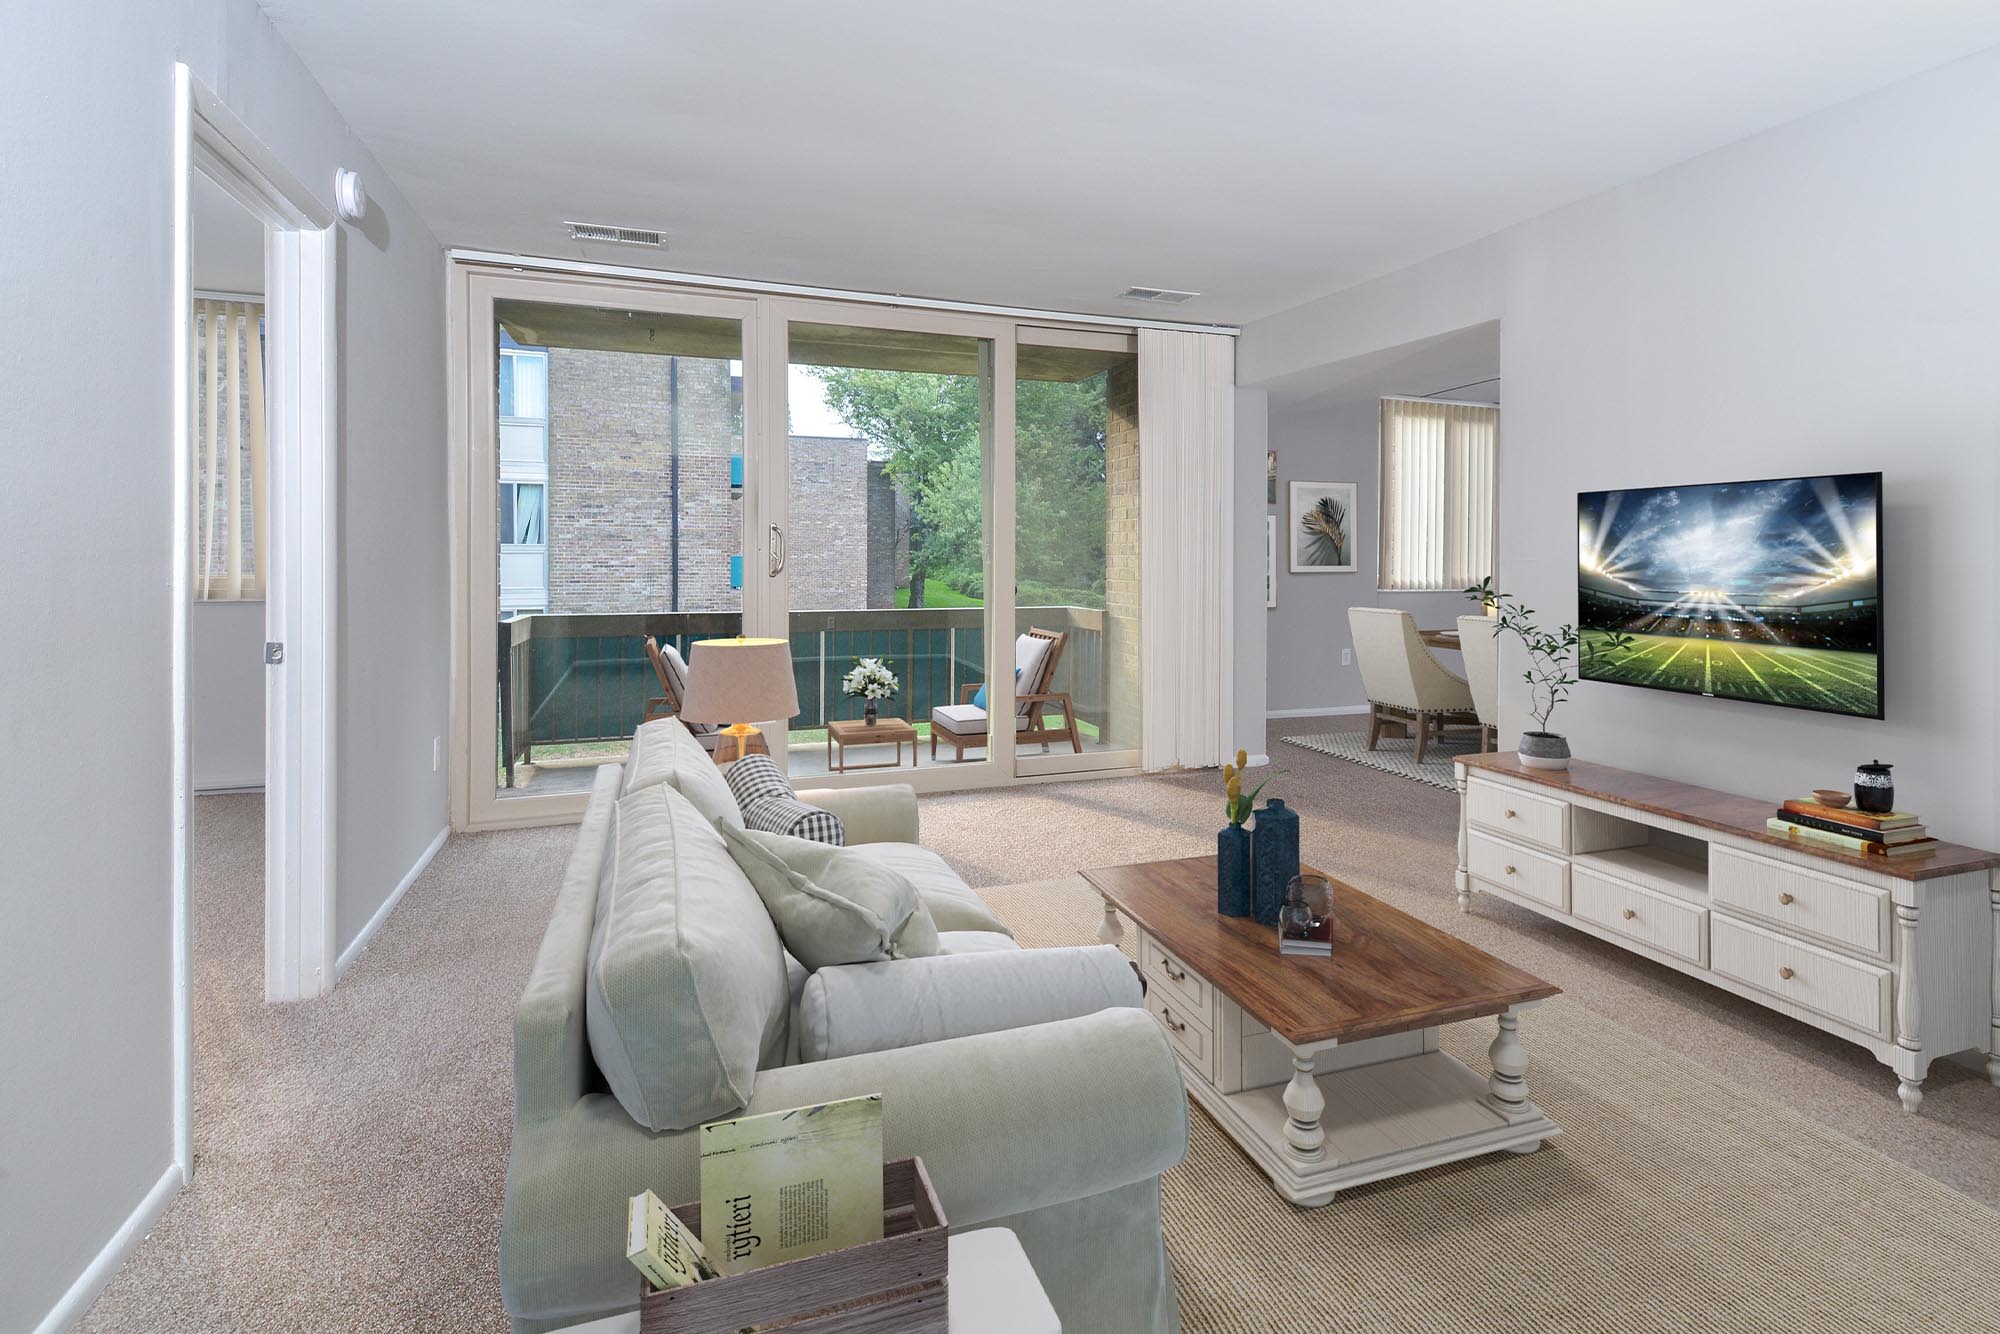 Spacious living room of a model home at Landmark Glenmont Station in Silver Spring, Maryland